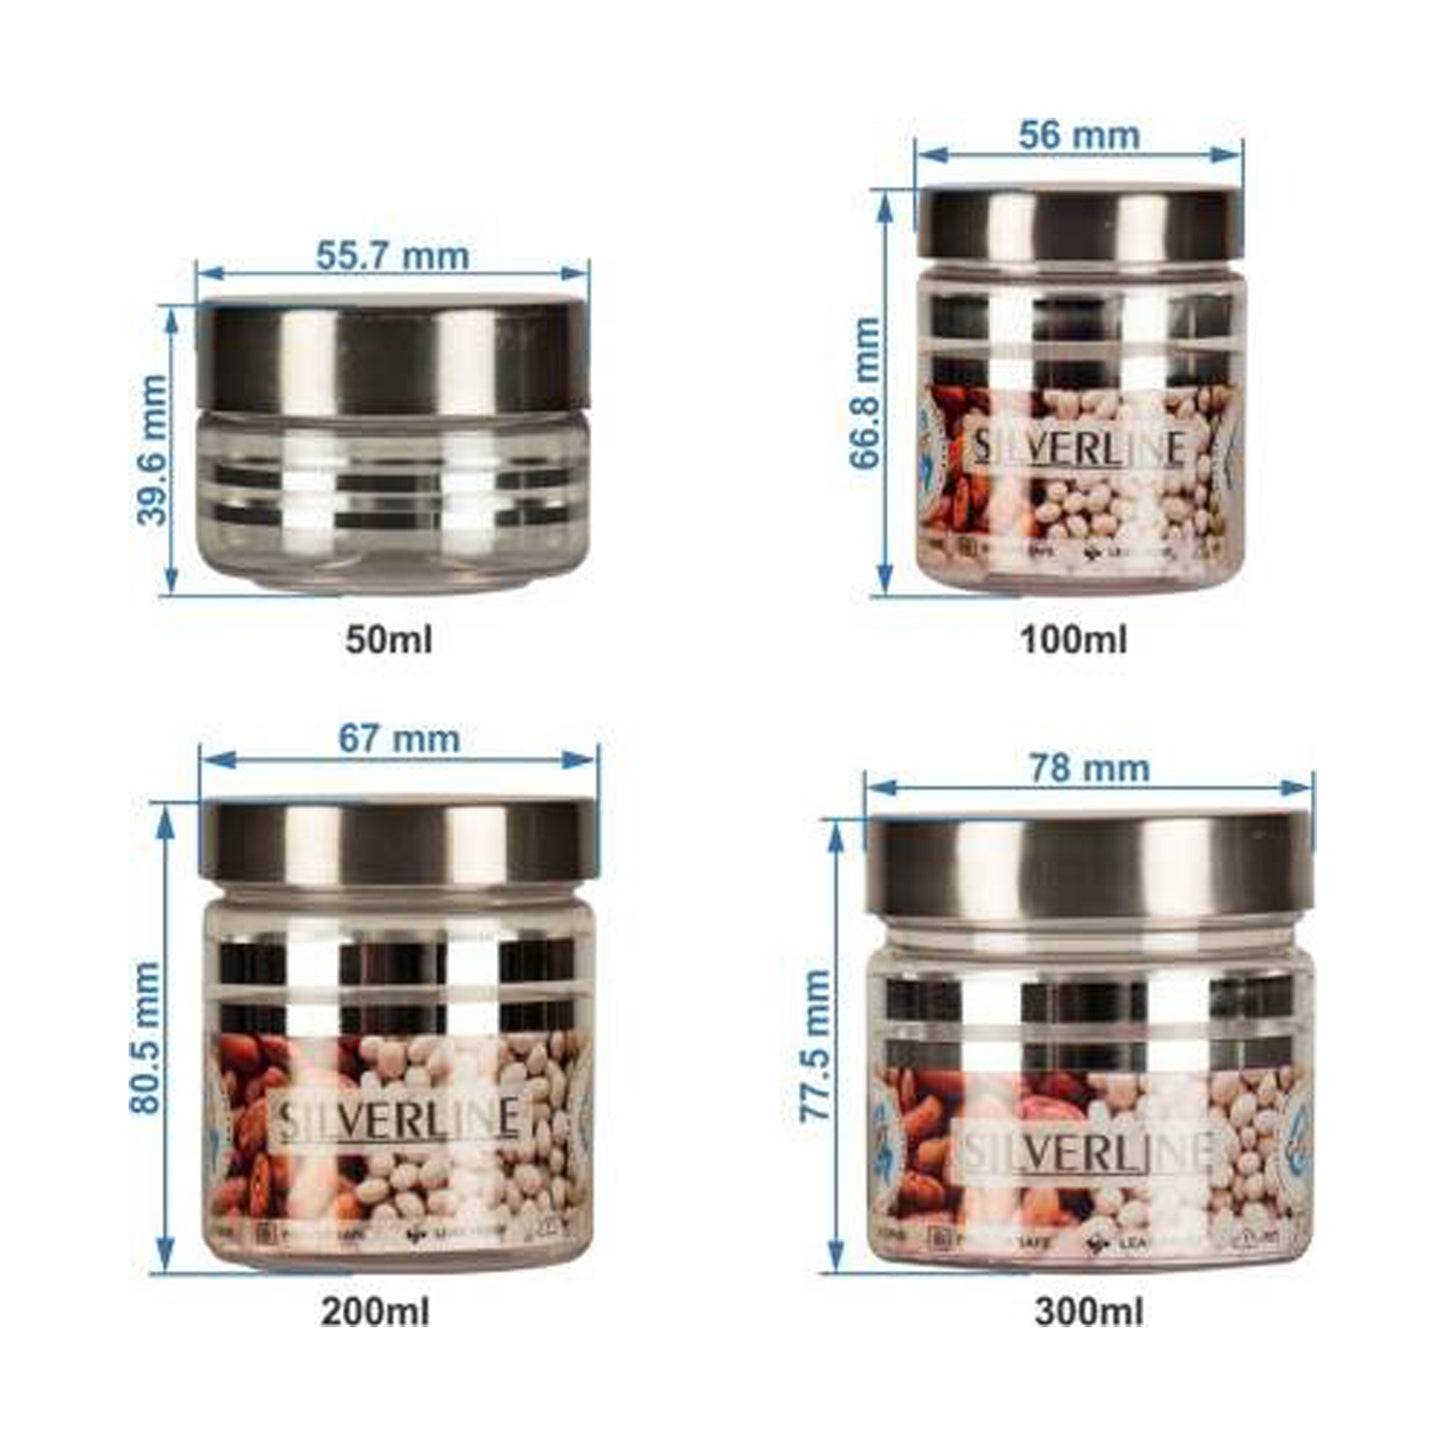 Silver Line Container - Pack of 15 - 300ml, 200ml, 100ml, 50ml